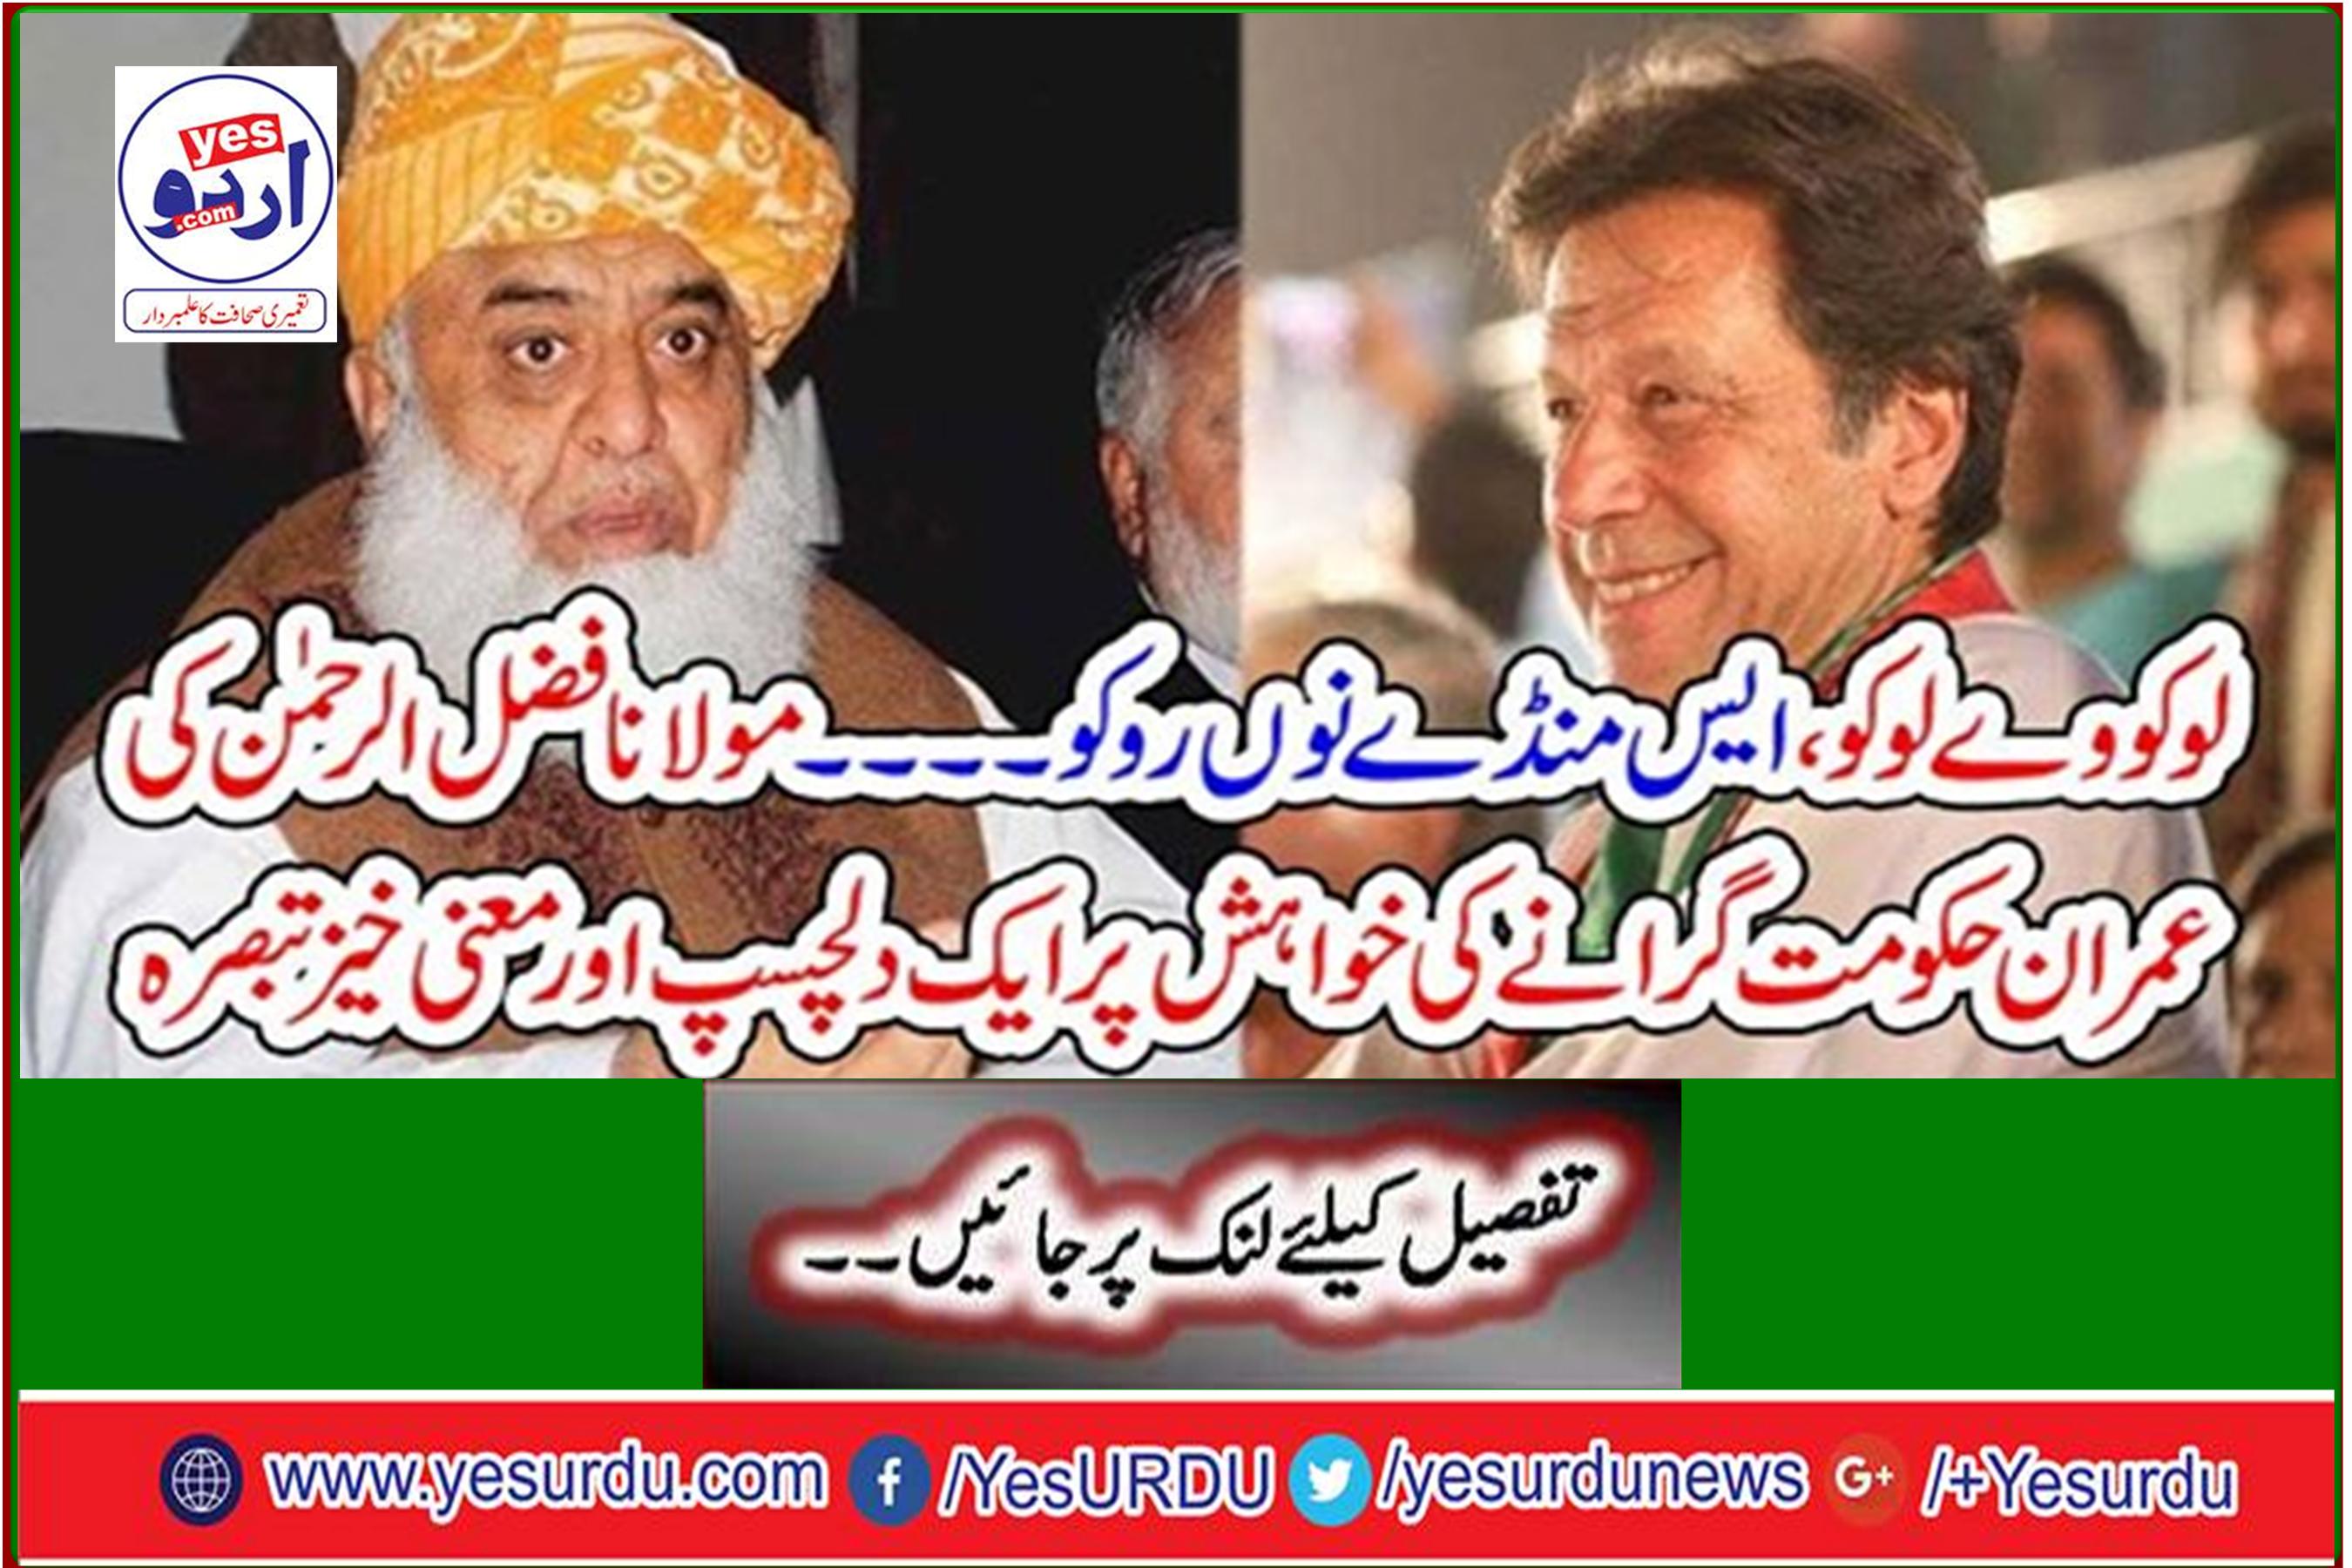 An interesting and meaningful comment on Maulana Fazl-ur-Rahman's desire to overthrow Imran's government